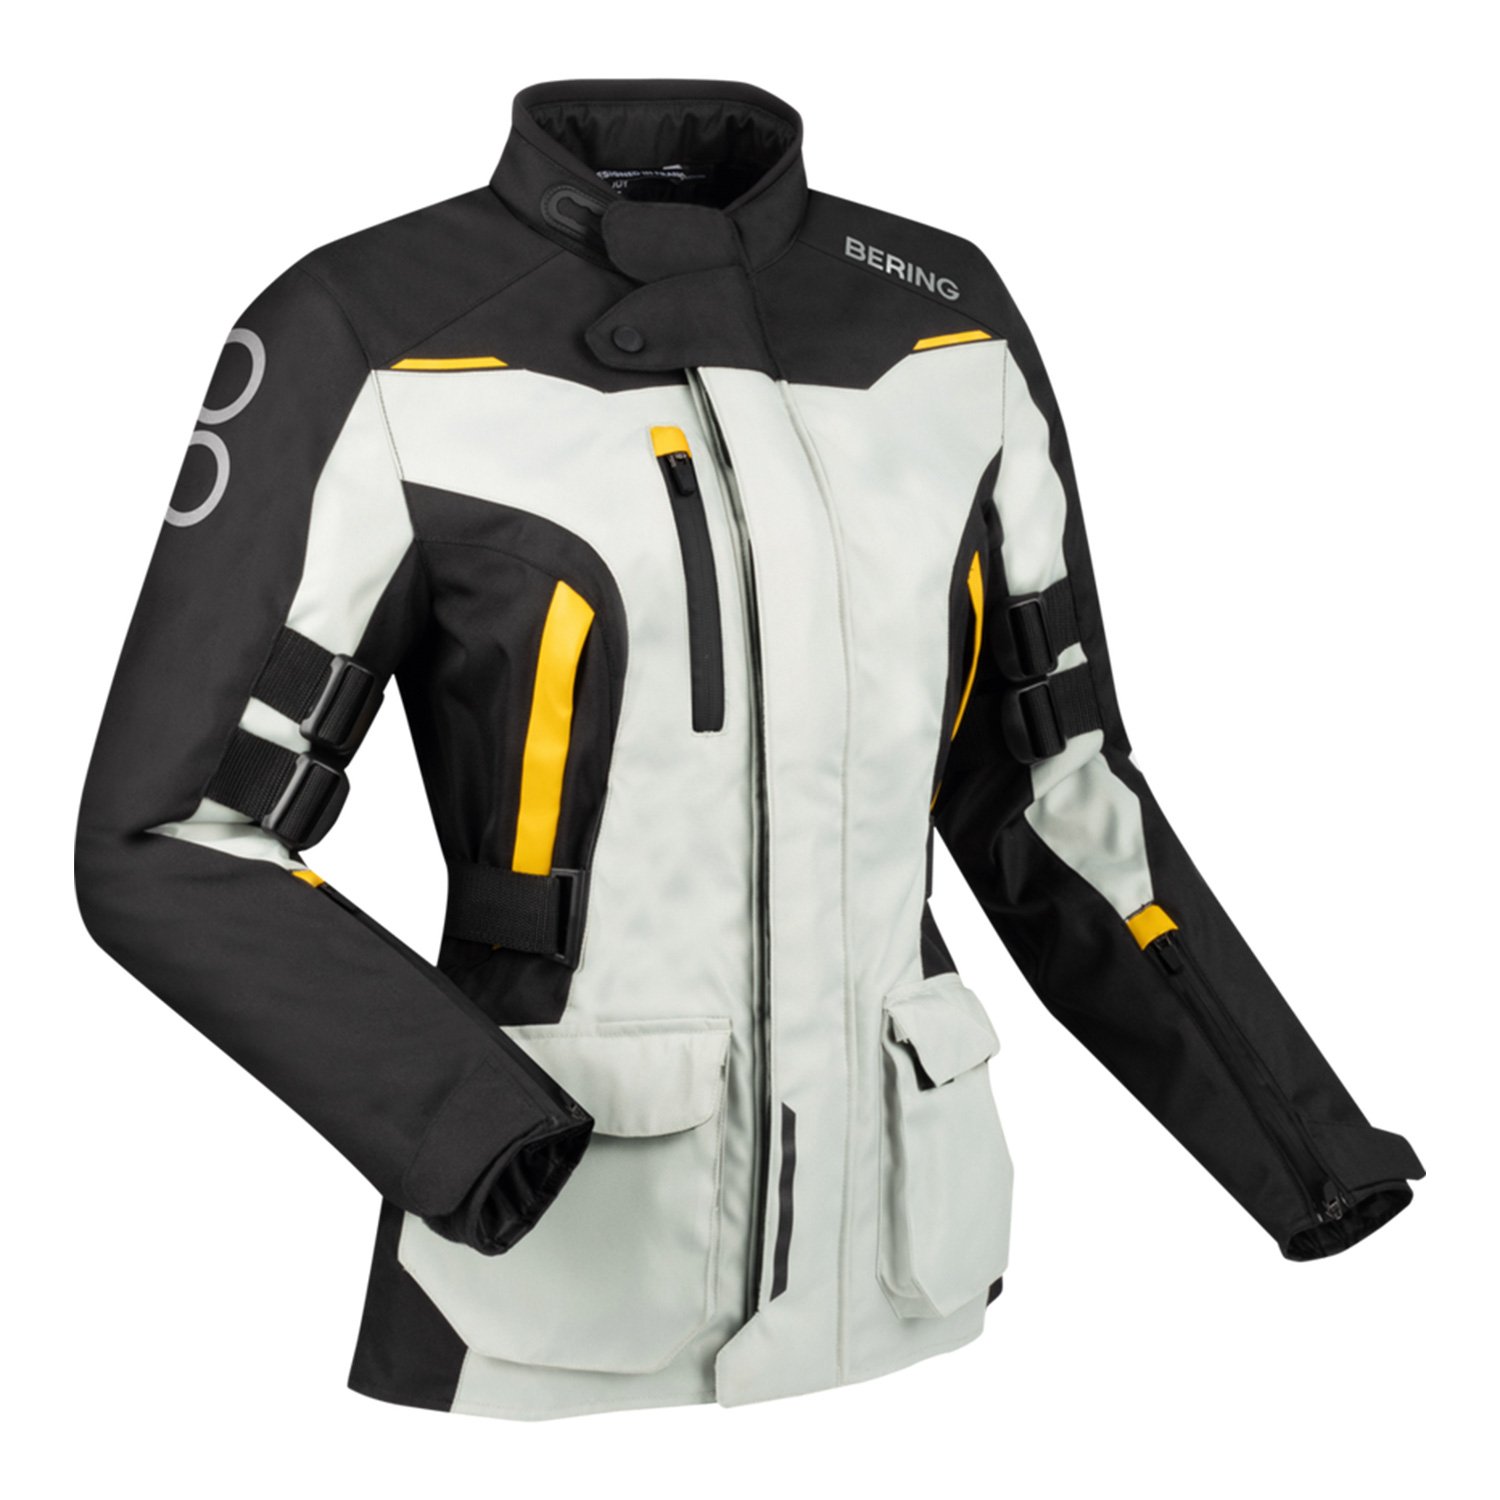 Image of EU Bering Lady Zephyr Jacket Black Grey Yellow Taille T6